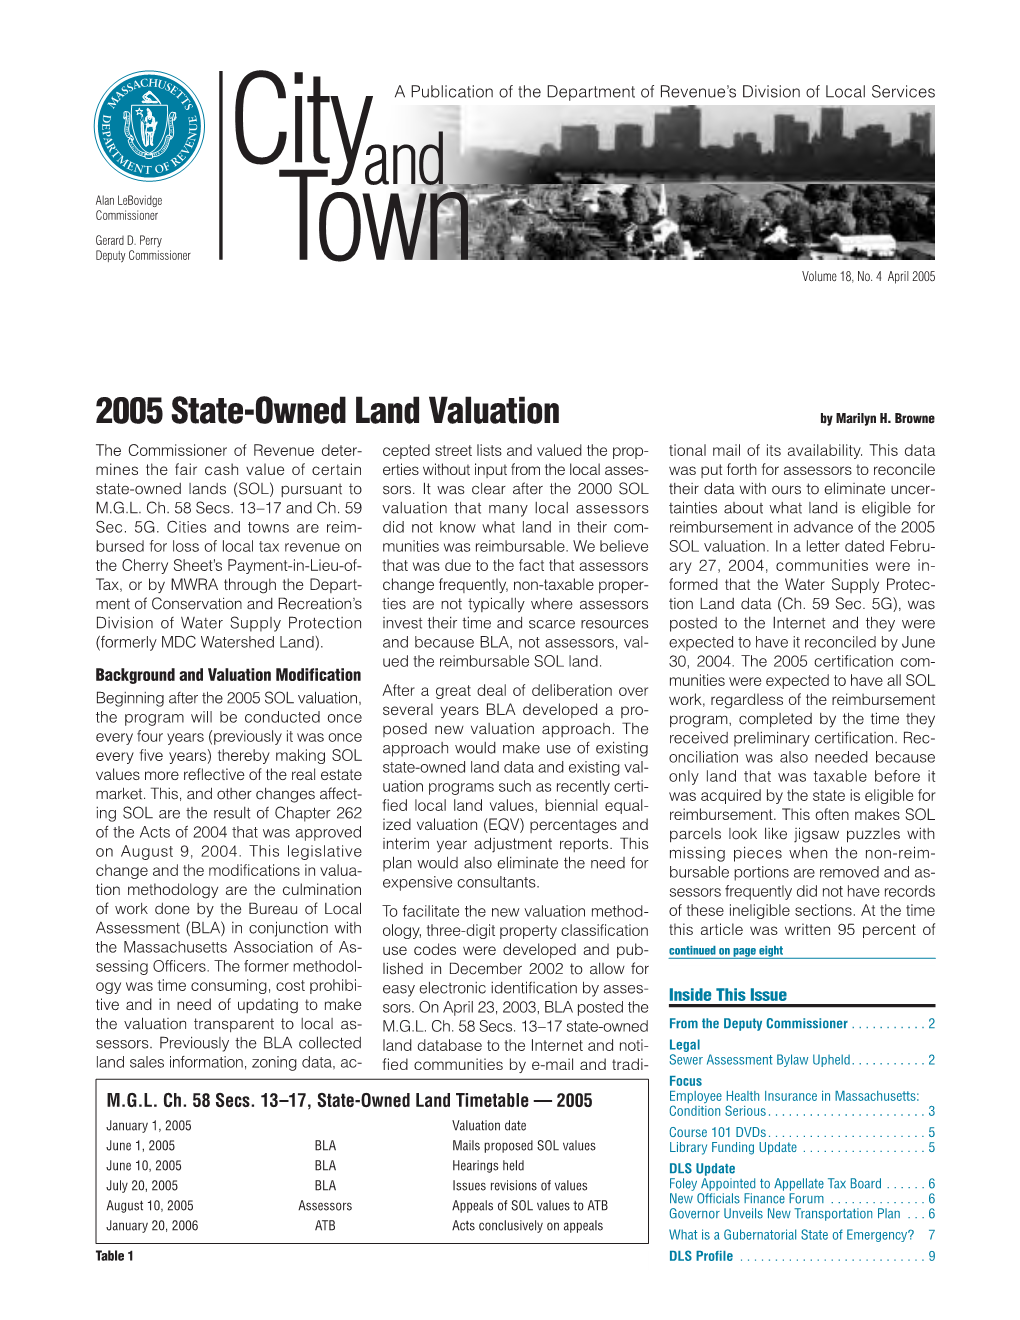 2005 State-Owned Land Valuation by Marilyn H